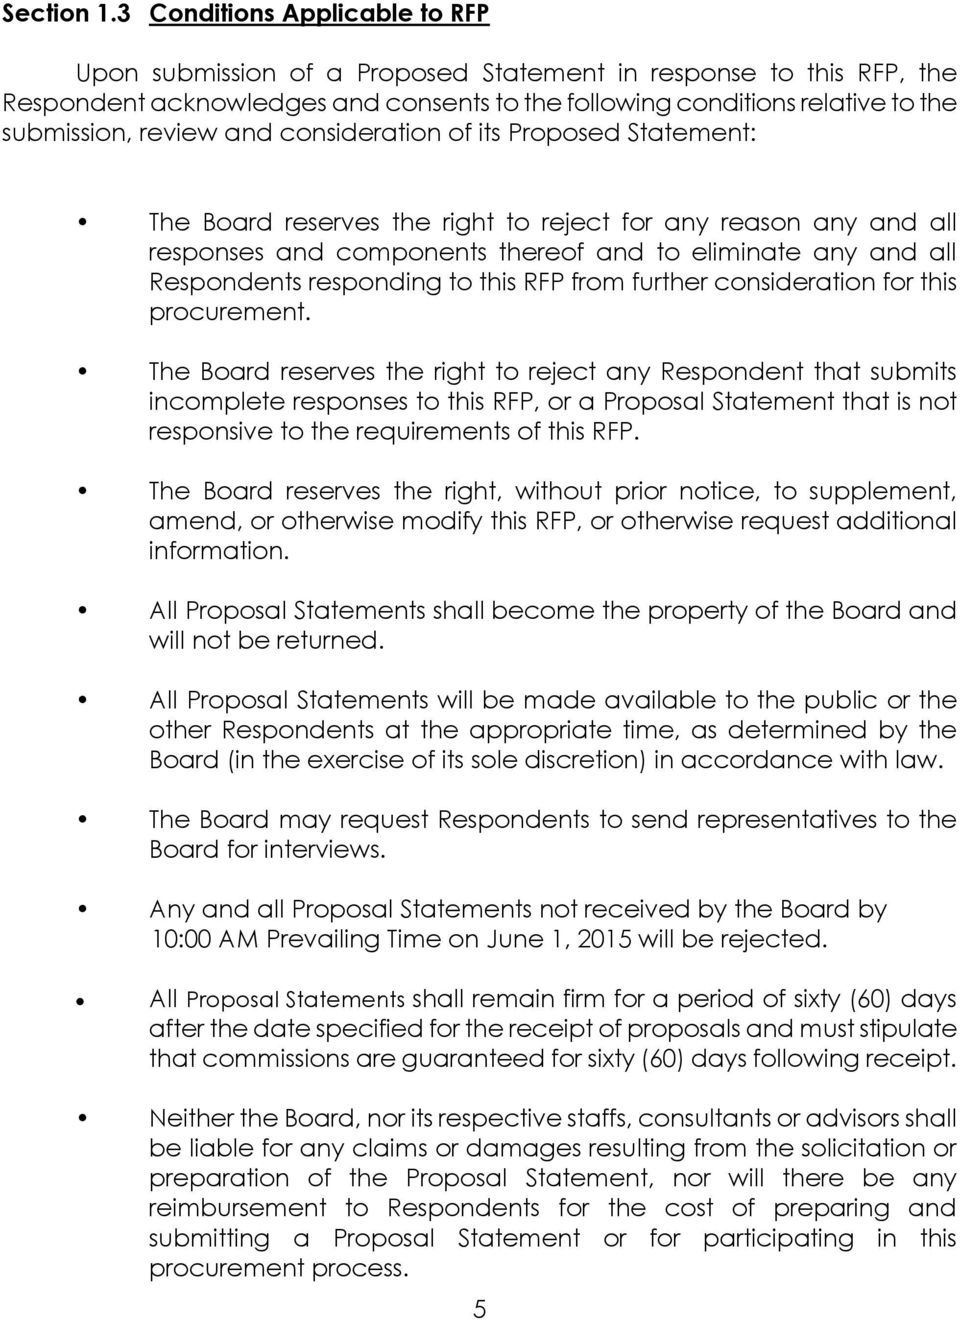 and consideration of its Proposed Statement: The Board reserves the right to reject for any reason any and all responses and components thereof and to eliminate any and all Respondents responding to